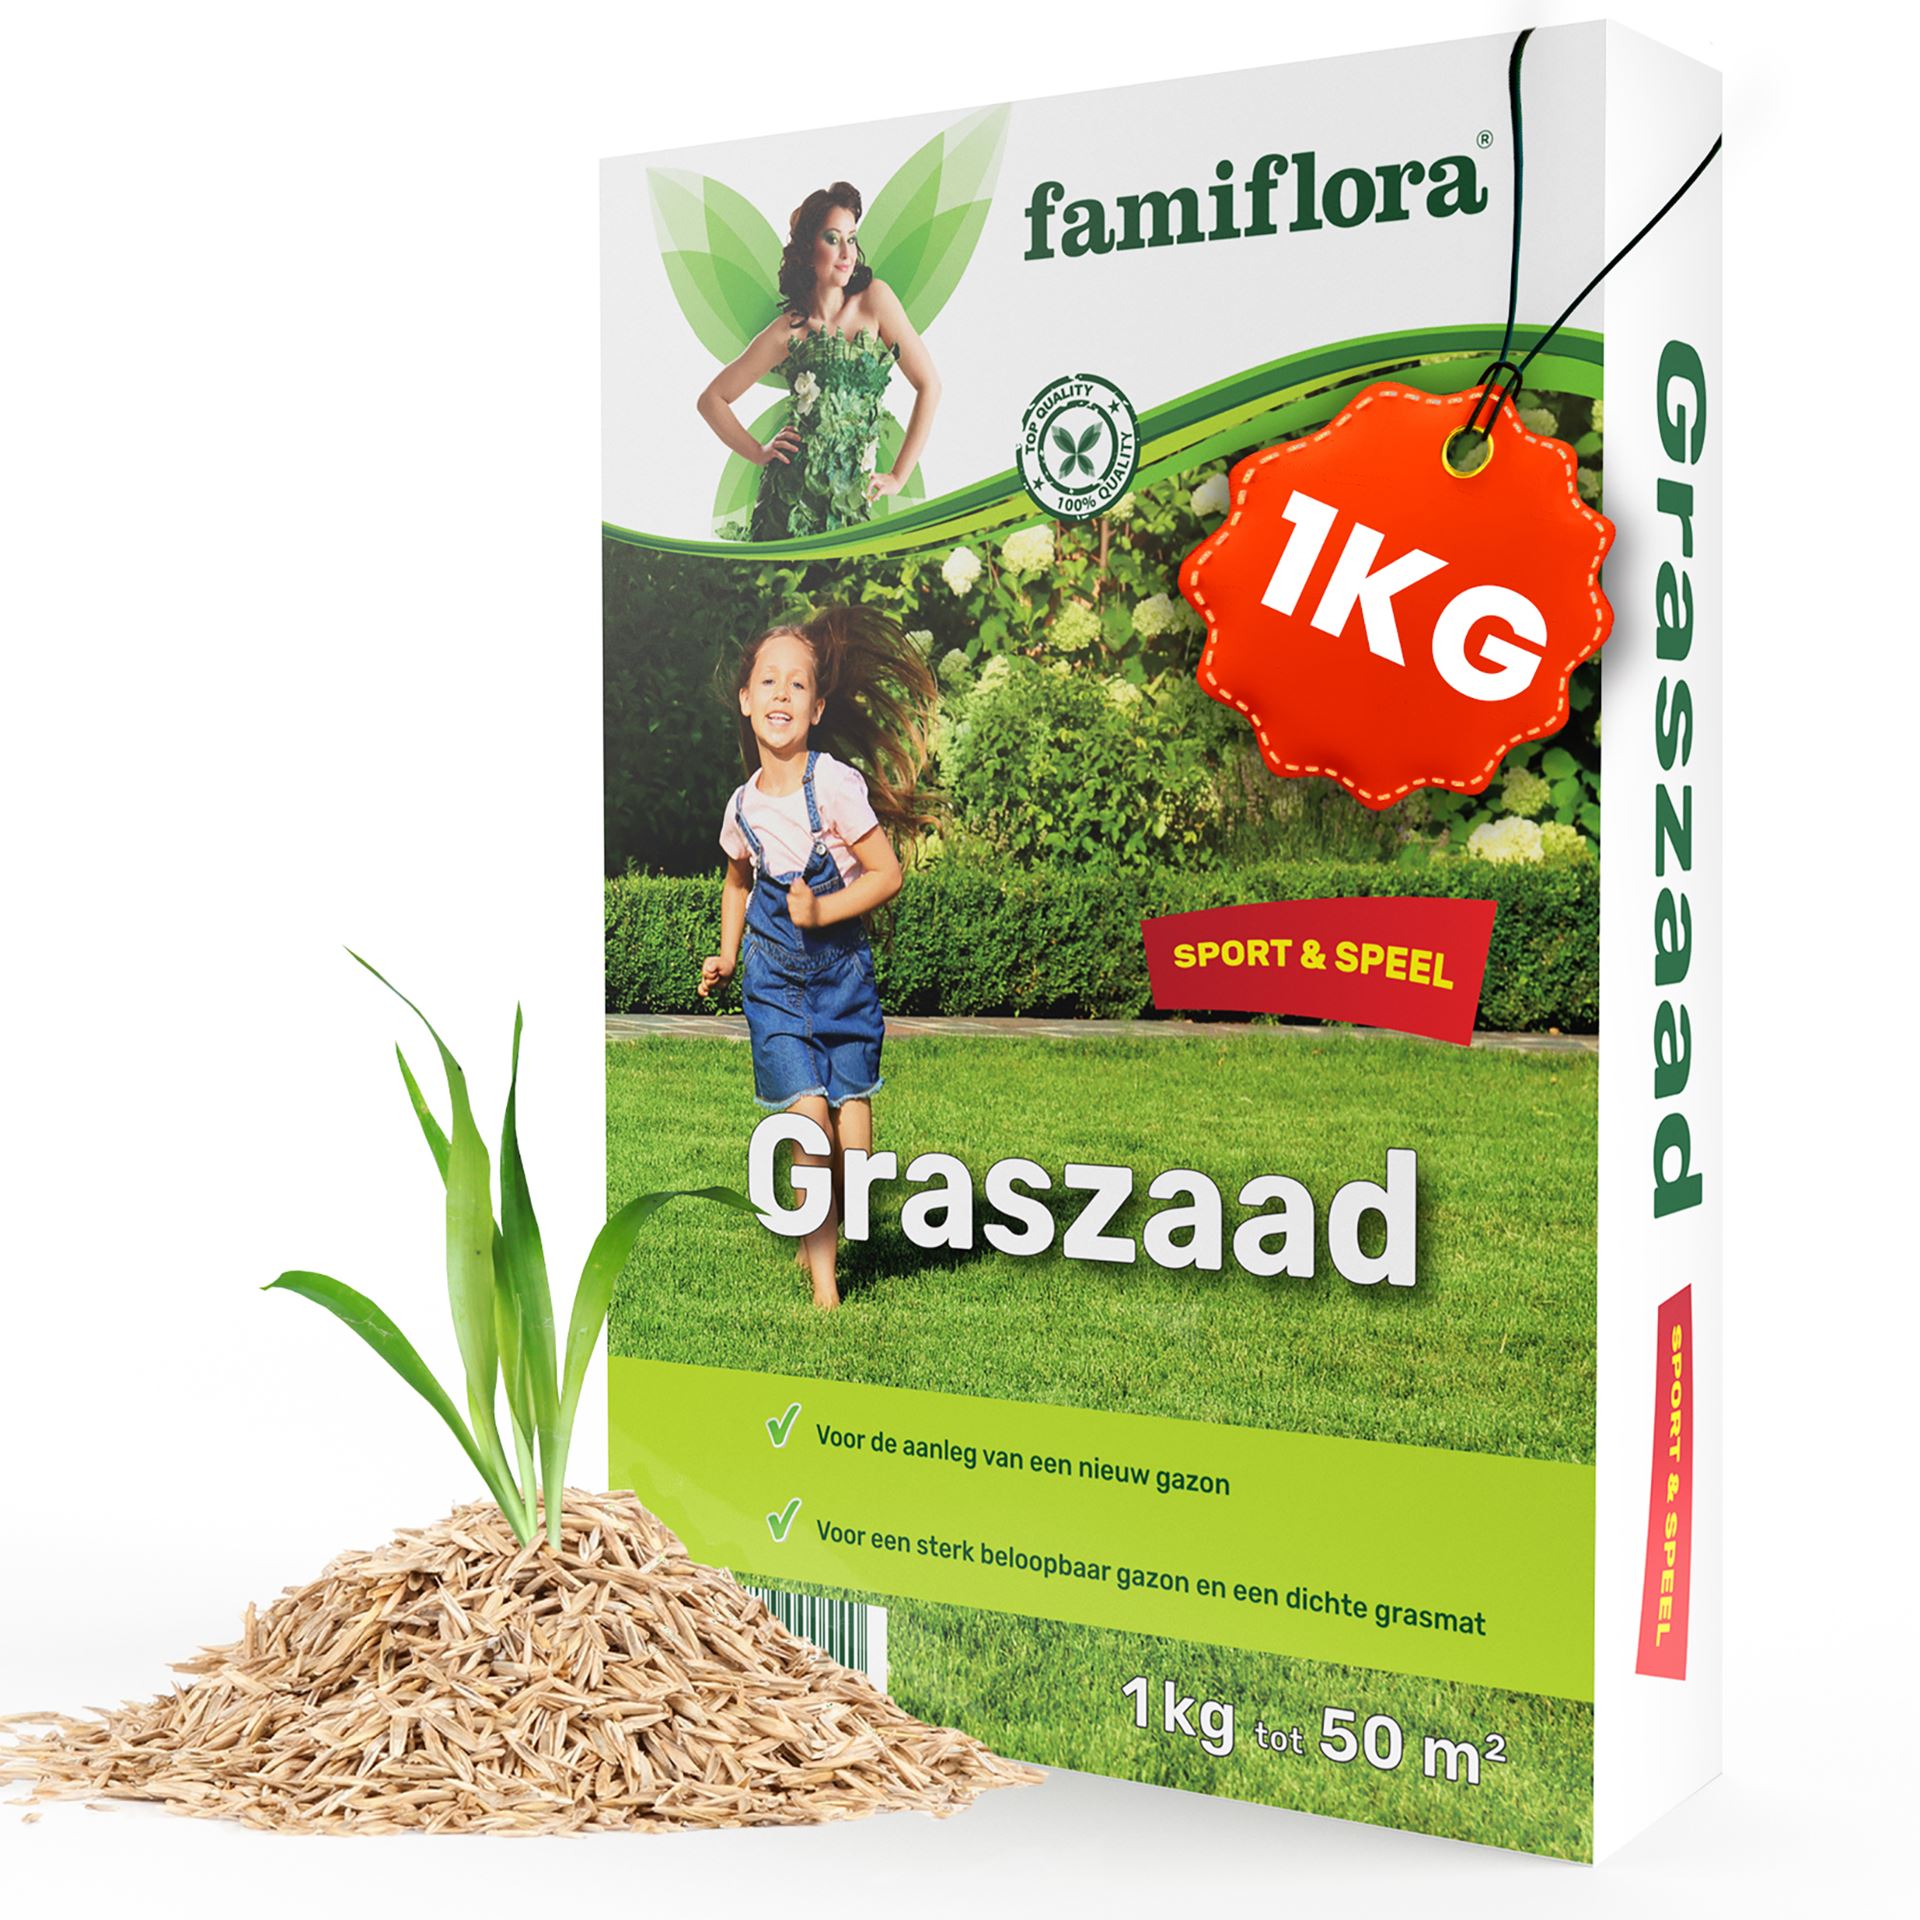 Famiflora grass seed Play & Sport - for establishing new lawn - 1kg up to 50m²